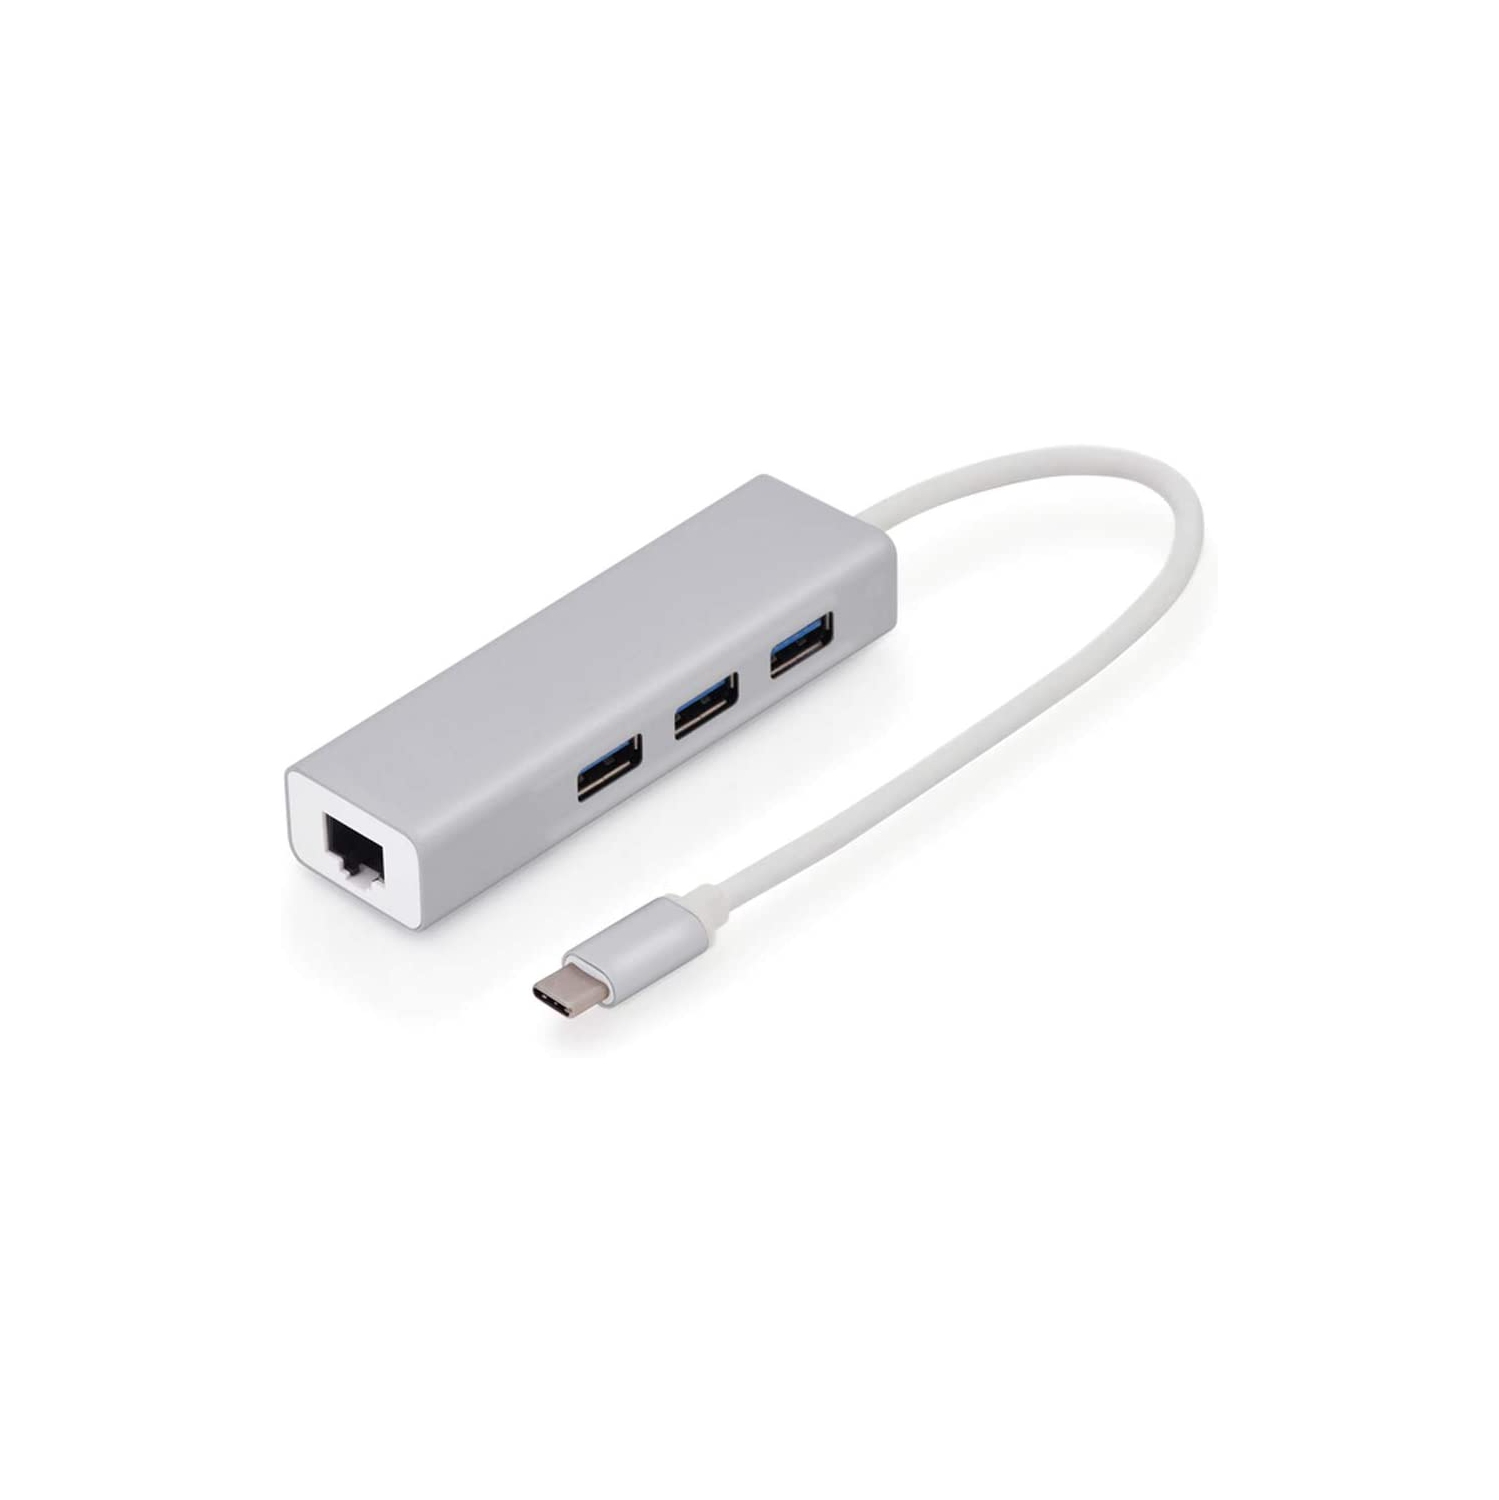 USB Type C to Ethernet 1000 Mbps (1Gbps) Adapter RJ45 Dongle 3 USB Ports 3.0 Ultra Slim Data Hub Compatible with MacBook Air/Pro iMac Acer Lenovo Asus HP Samsung Huawei - S